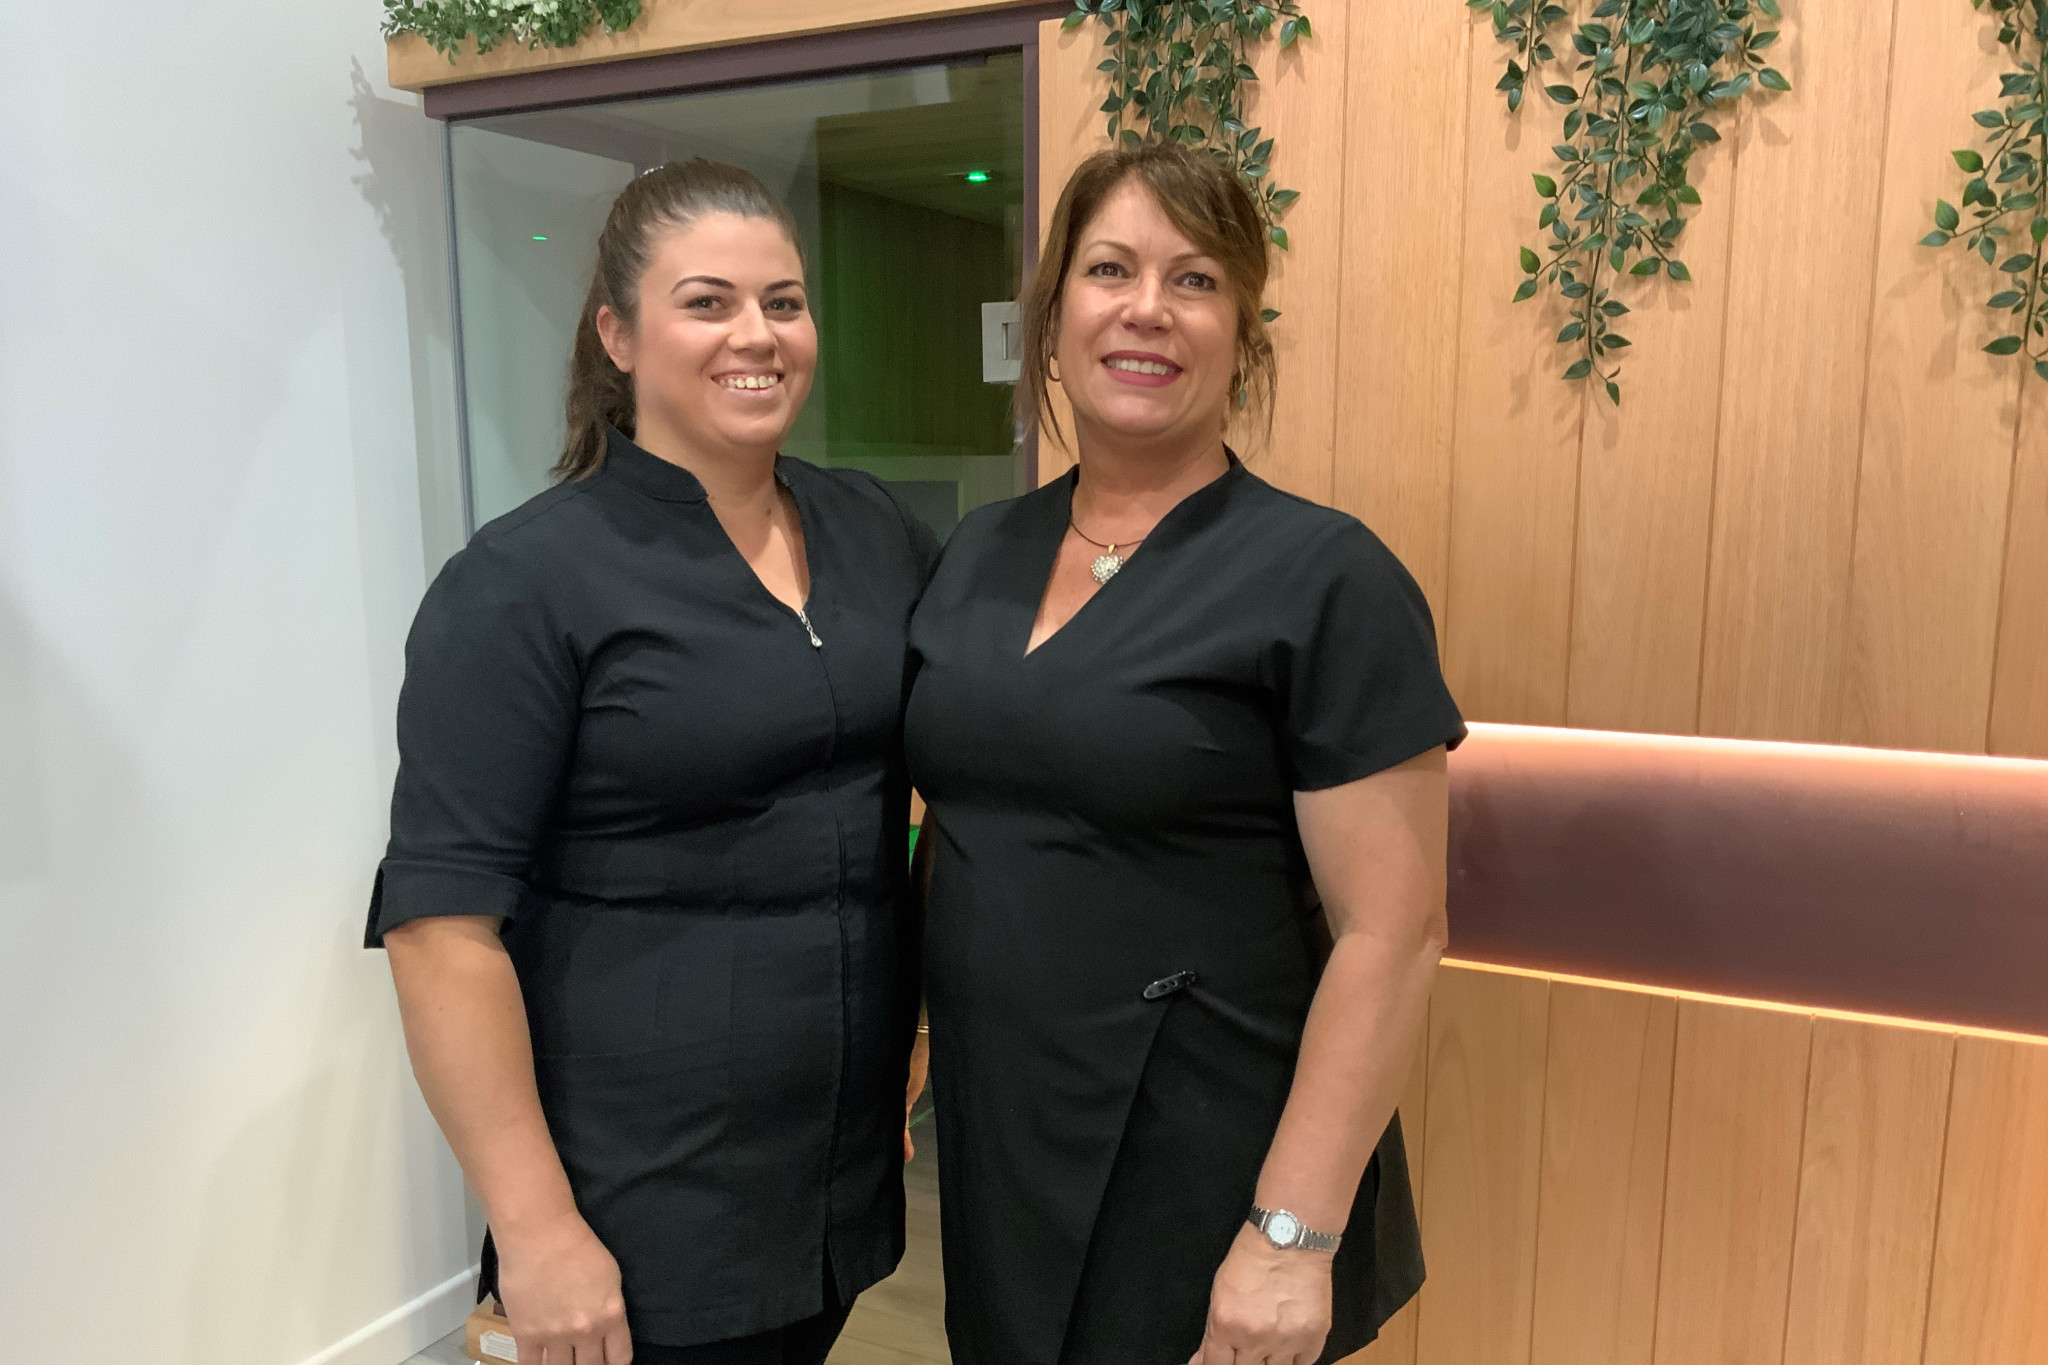 Gemma Sloane and Celina Urbano are keen to provide a range of products and services at the newly opened Celina’s Beauty, Massage & Natural Therapies.